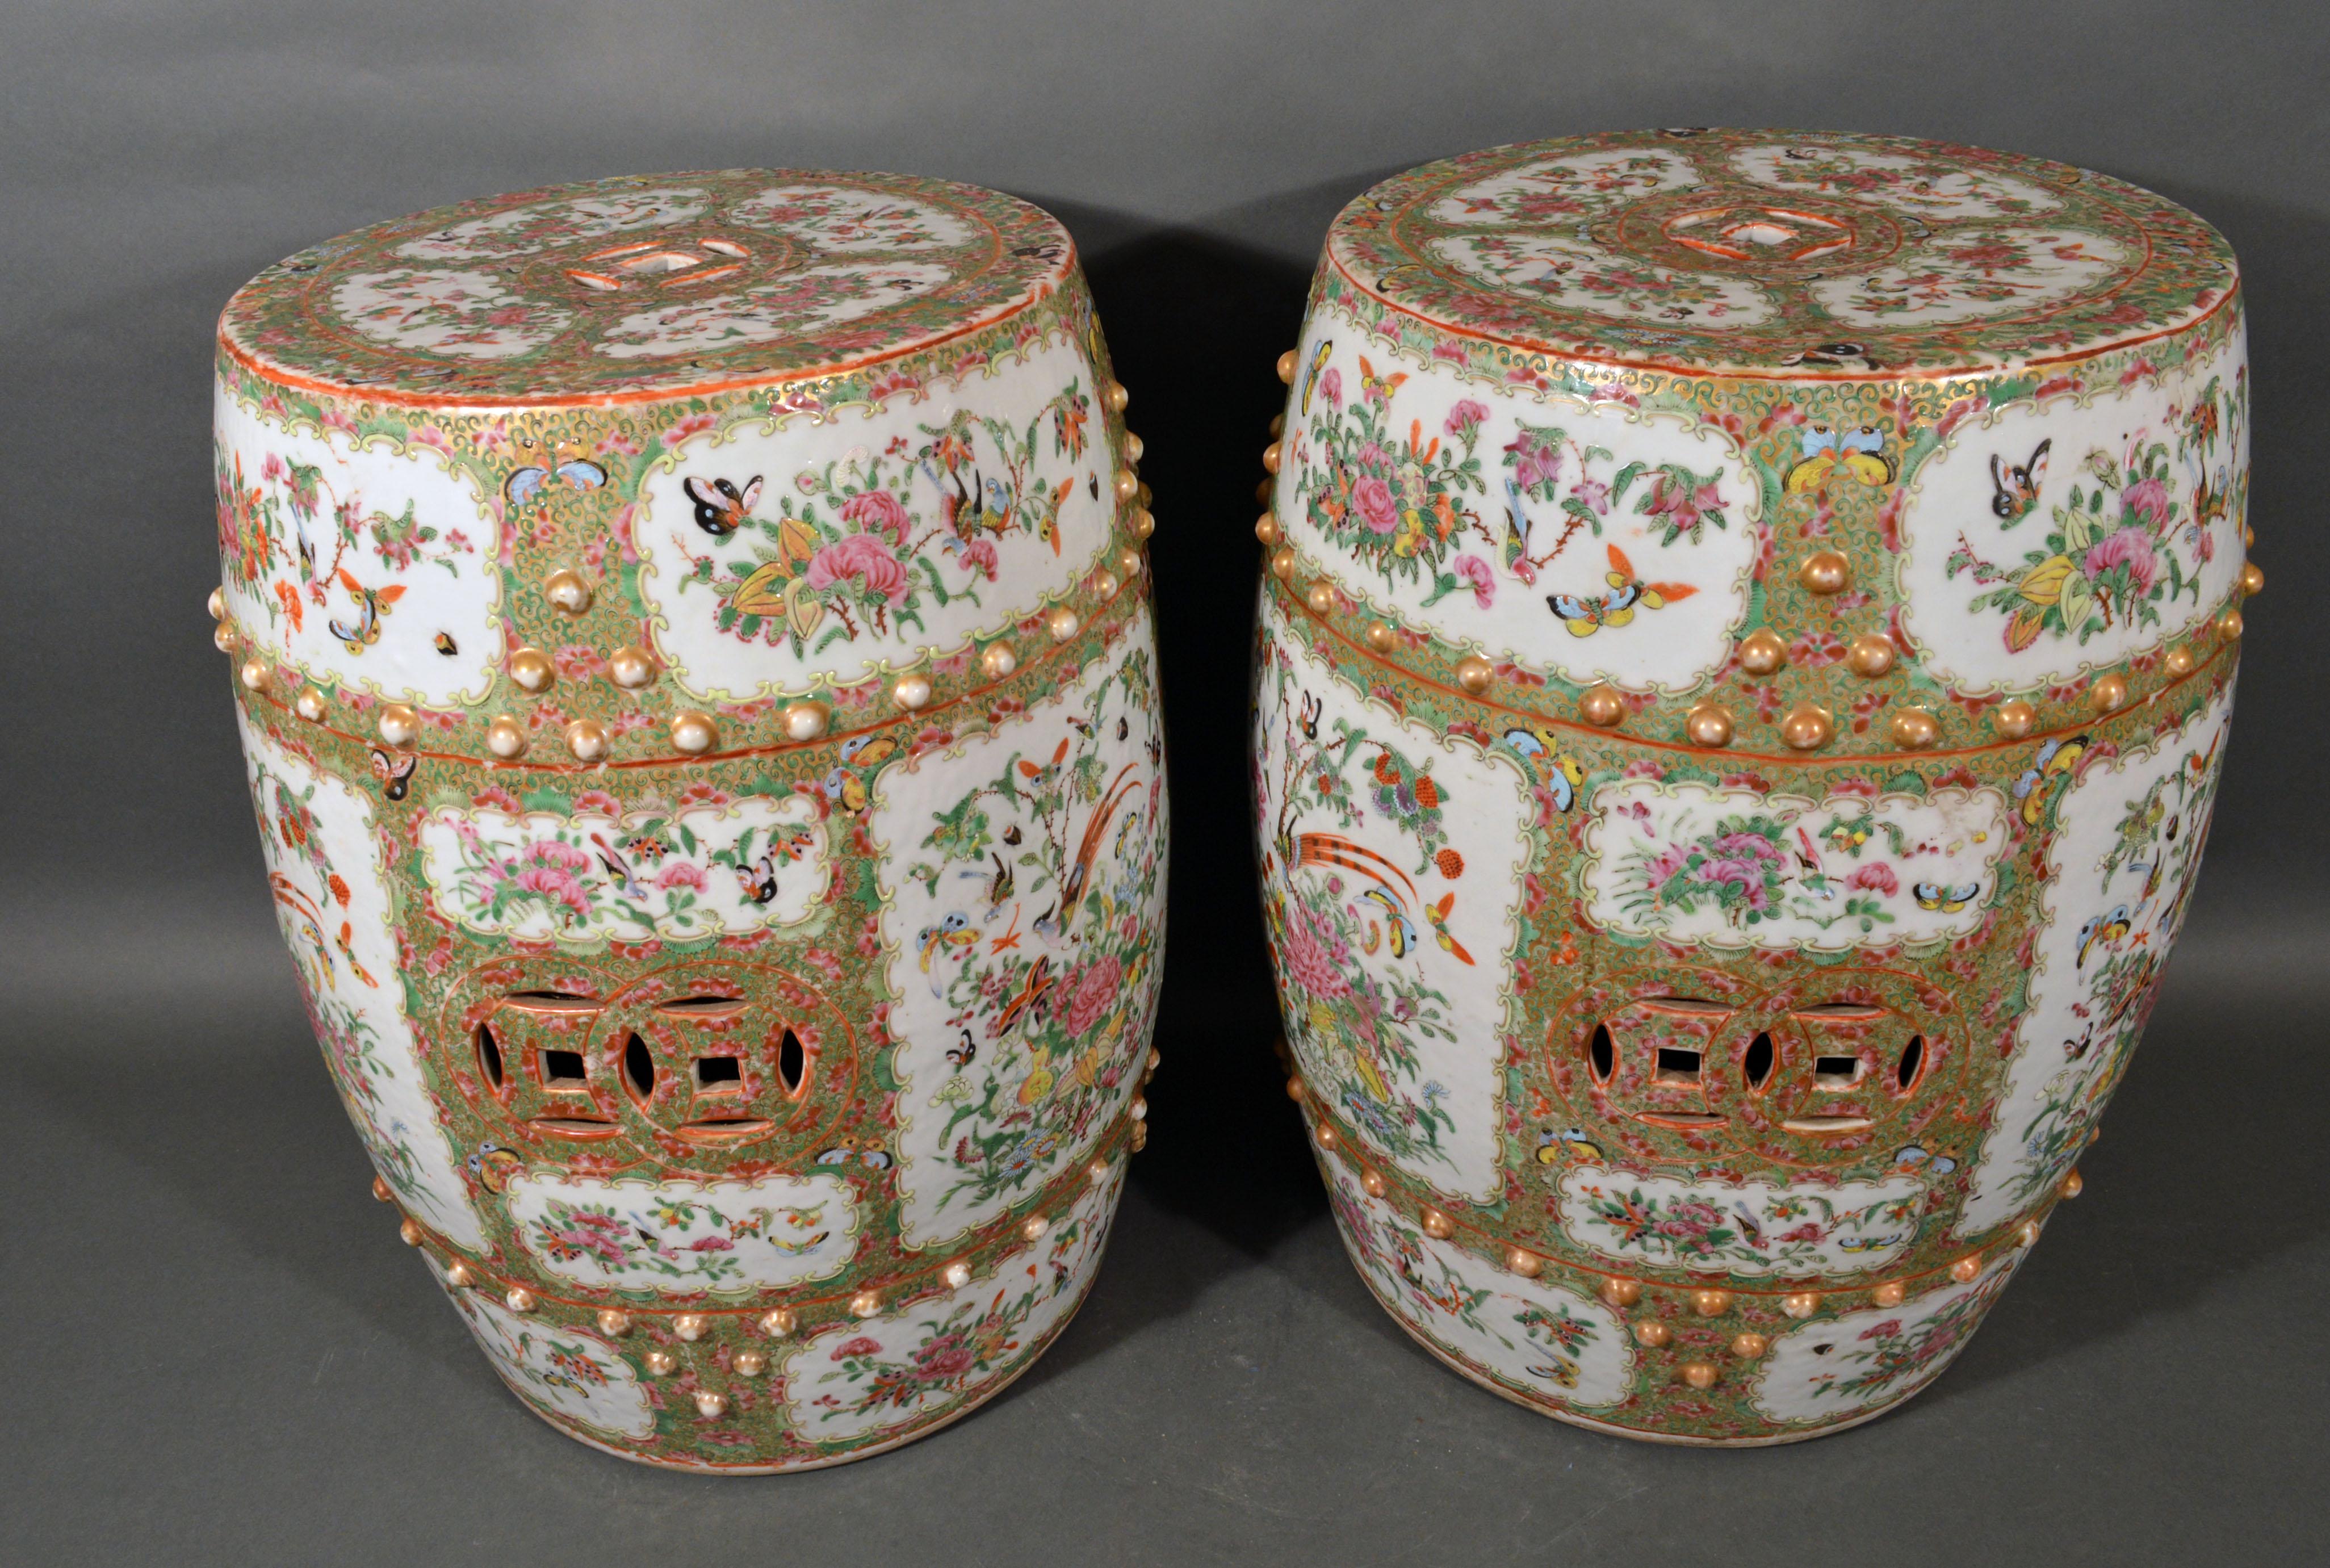 Chinese export rose medallion circular pair of garden seats,
circa 1840-1860.

A lovely pair of Chinese export rose Medallion circular garden seats. Each seat has four panels of 